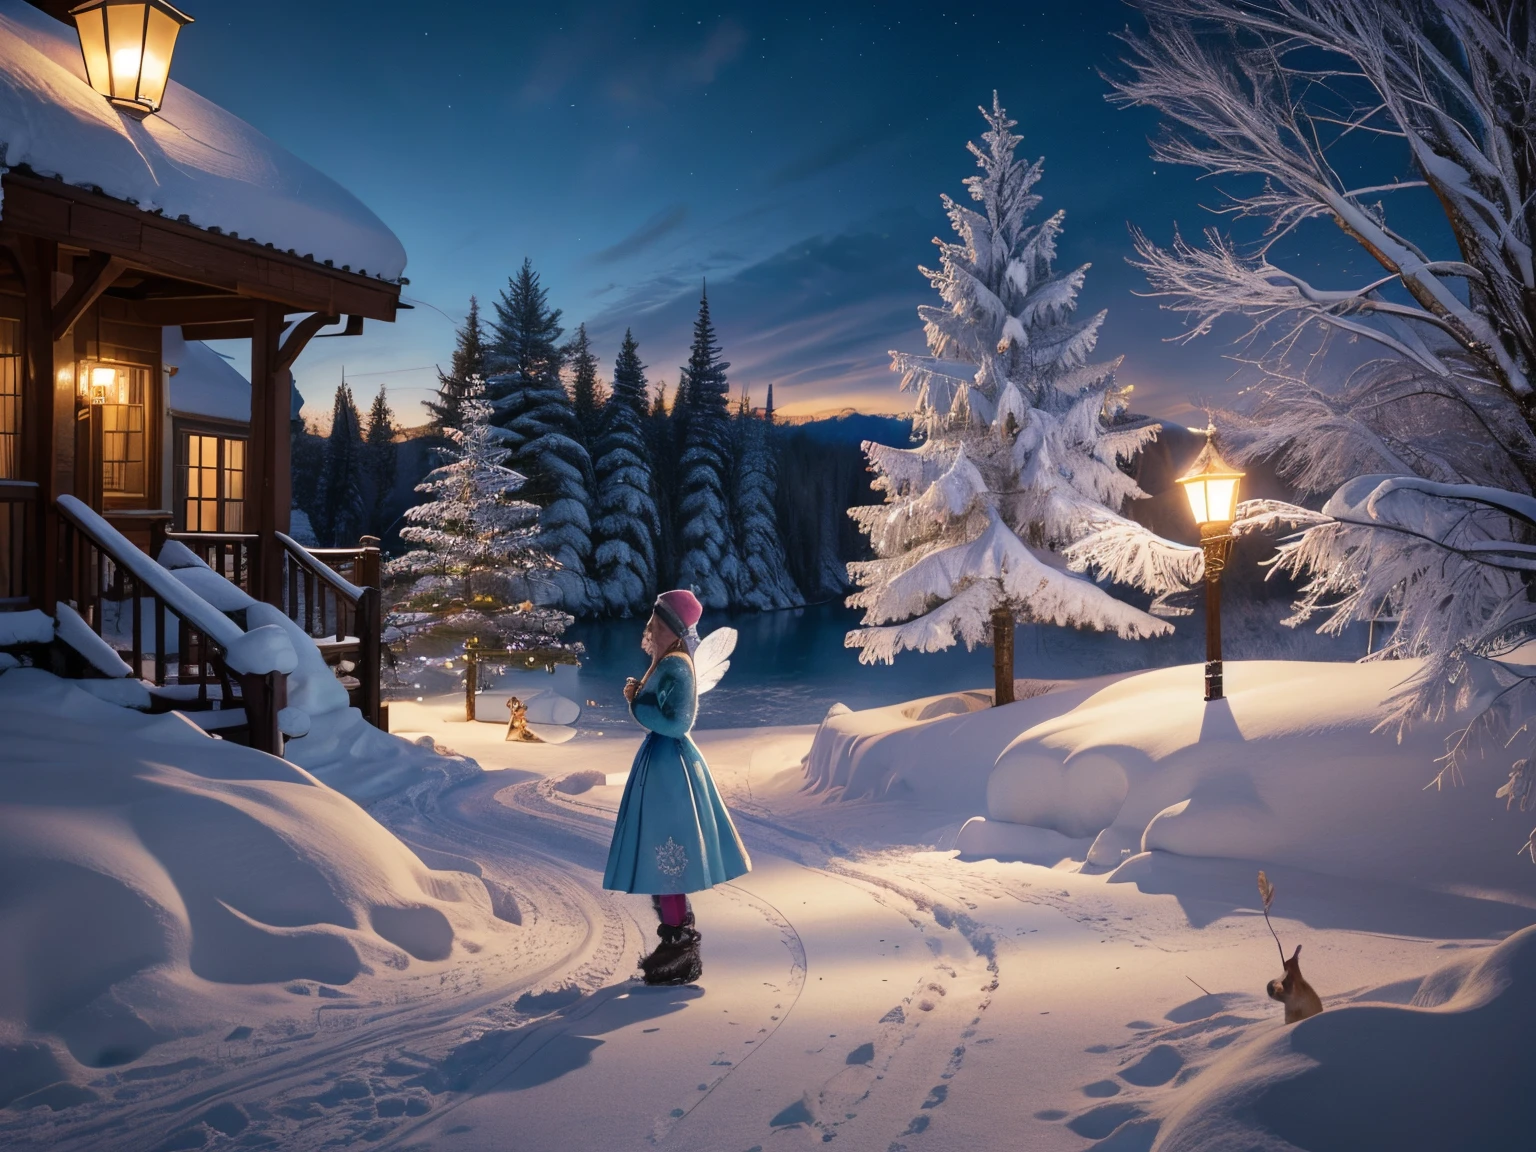 (best quality,4k,8k,highres,masterpiece:1.2),ultra-detailed,(realistic,photorealistic,photo-realistic:1.37),beautiful girl in winter wonderland,sparkling snow,enchanted forest,delicate snowflakes,soft falling snow,breathtaking scenery,luxurious winter coat,rosy cheeks,icy eyelashes,playful smiles,winter boots,frosty breath,cozy earmuffs,fluffy snow-covered trees,glimmering snow-covered ground,glistening icicles on the tree branches,dazzling winter sunlight,crystal-clear blue sky,magical ice palace,small adorable animals,snow rabbits,sweet castle made of candies,delicious candy canes,icing sugar rooftops,colorful macarons,confectionery towers,chocolate water fountain,magical candyland,glowing fairy lights,dreamy snowscape,iridescent winter moonlight,soft pastel color palette